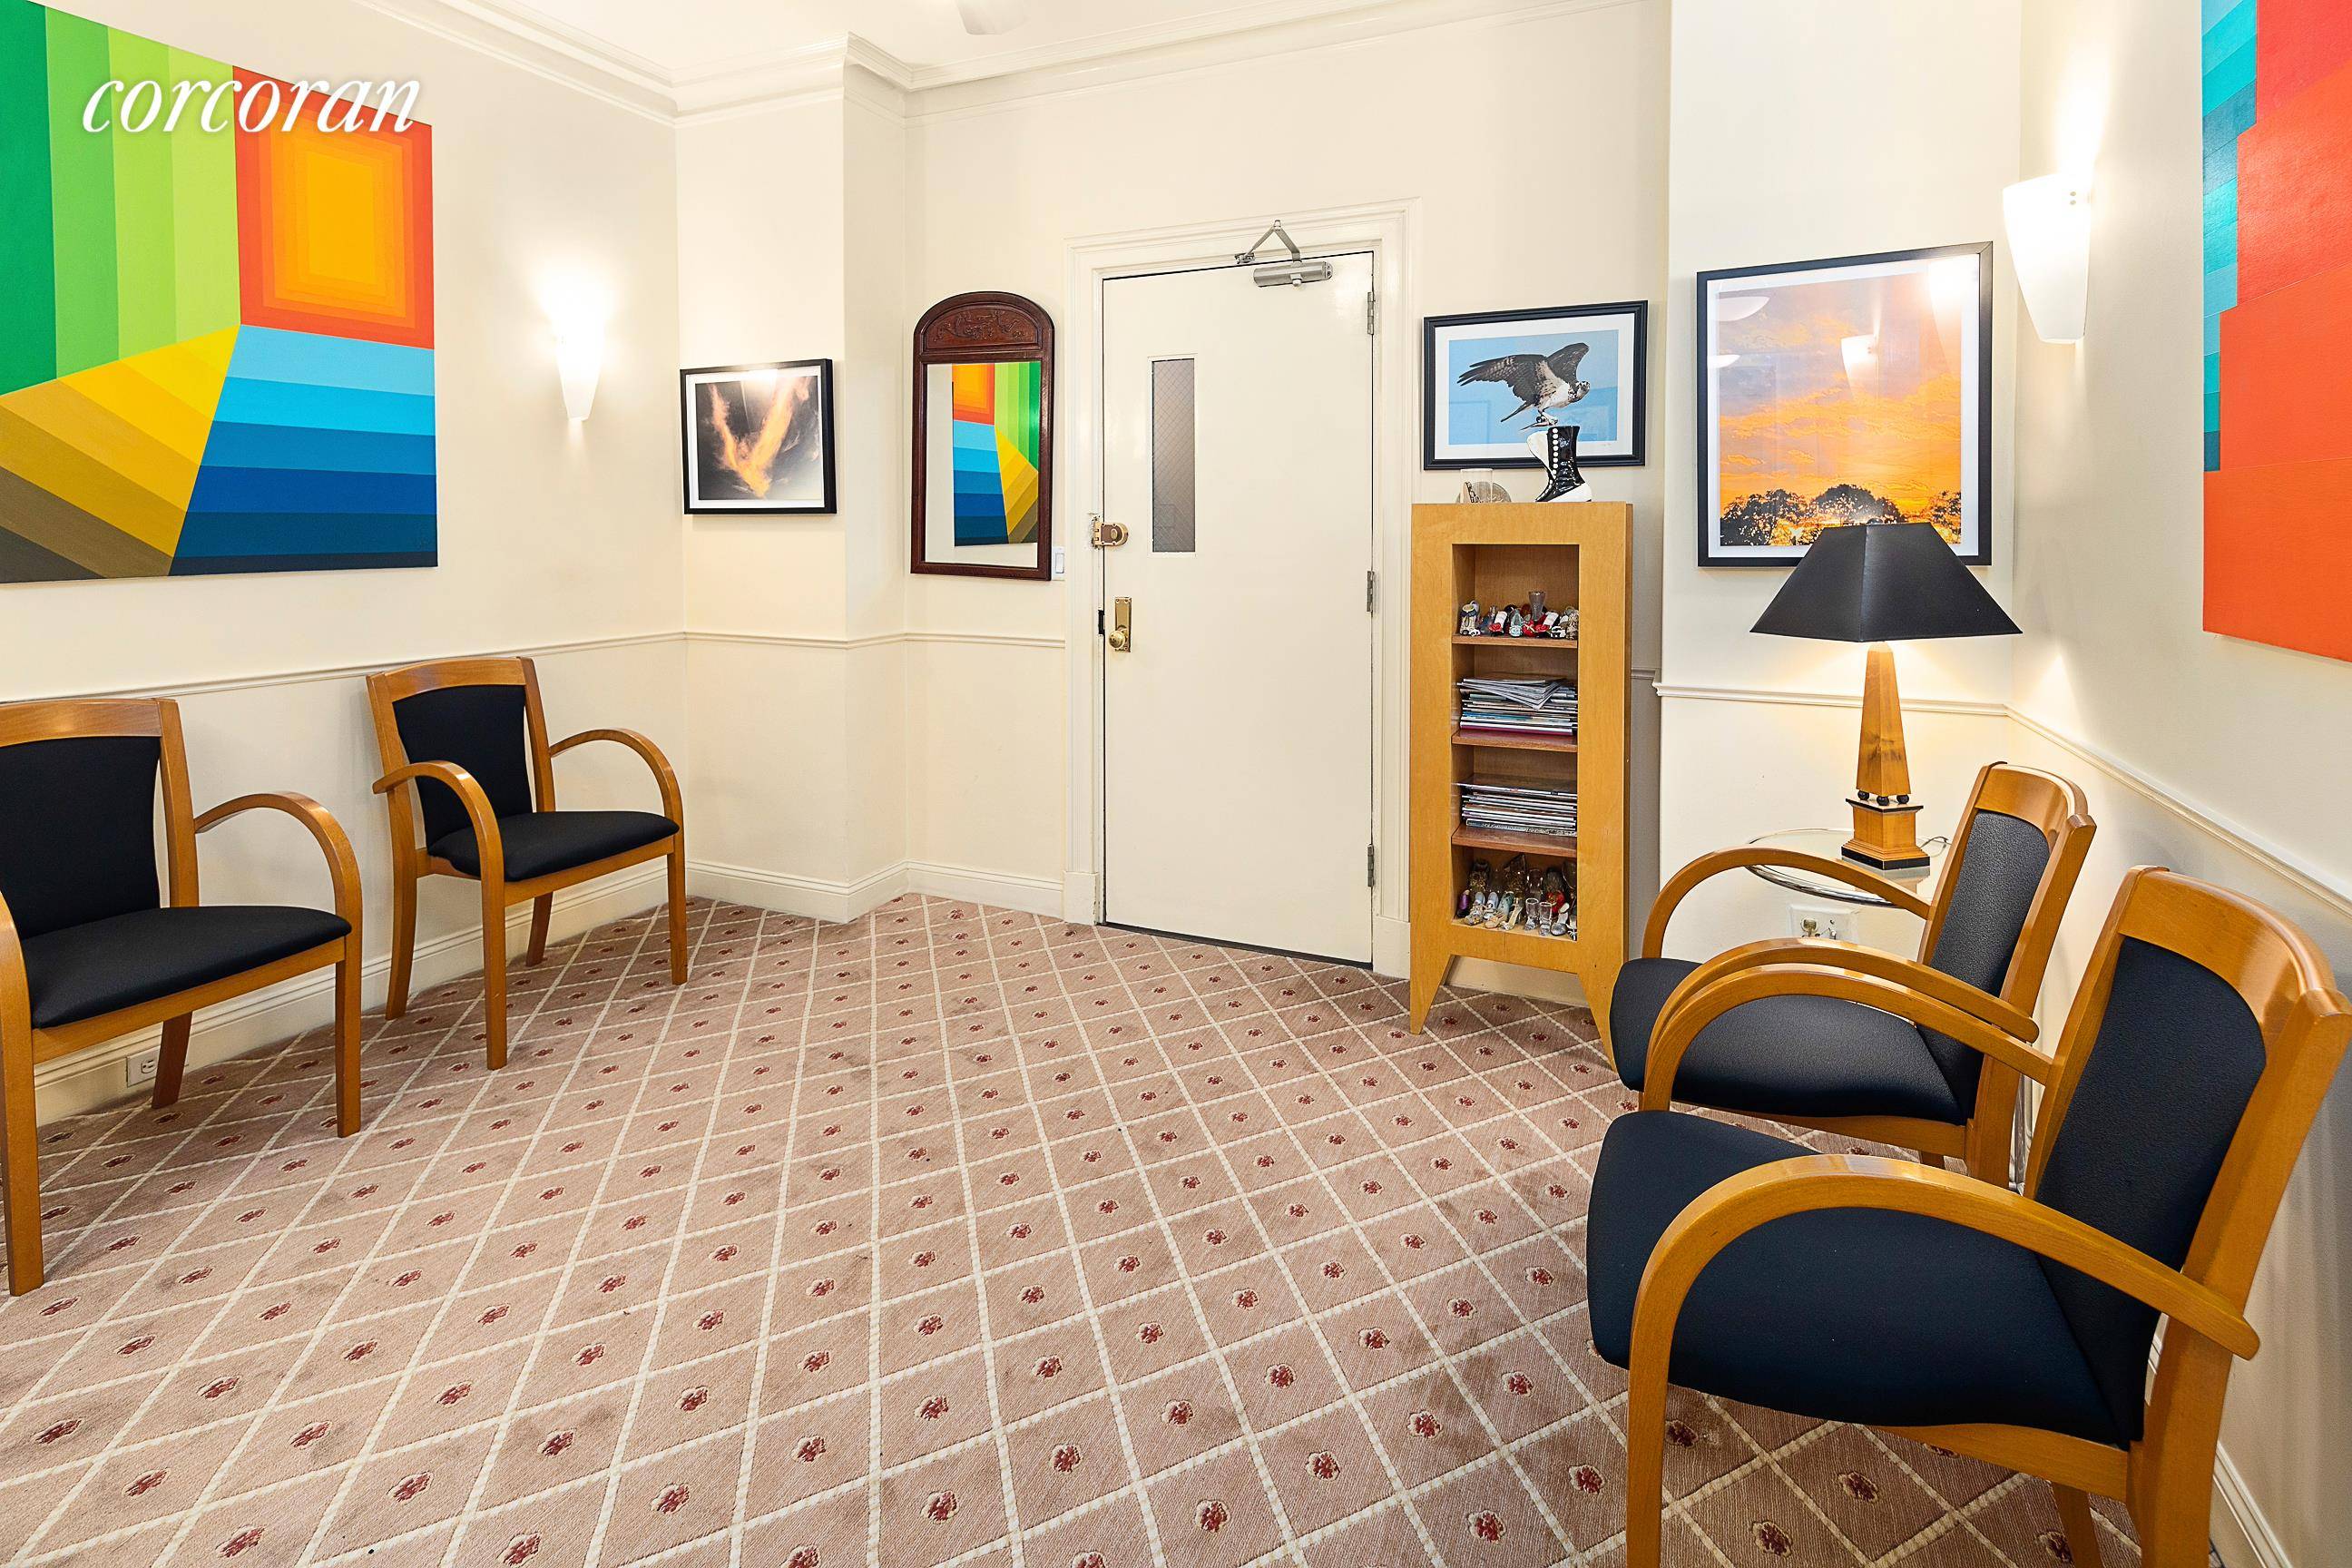 Ground floor corner medical suite available at 580 Park Avenue at the corner of East 63rd Street.